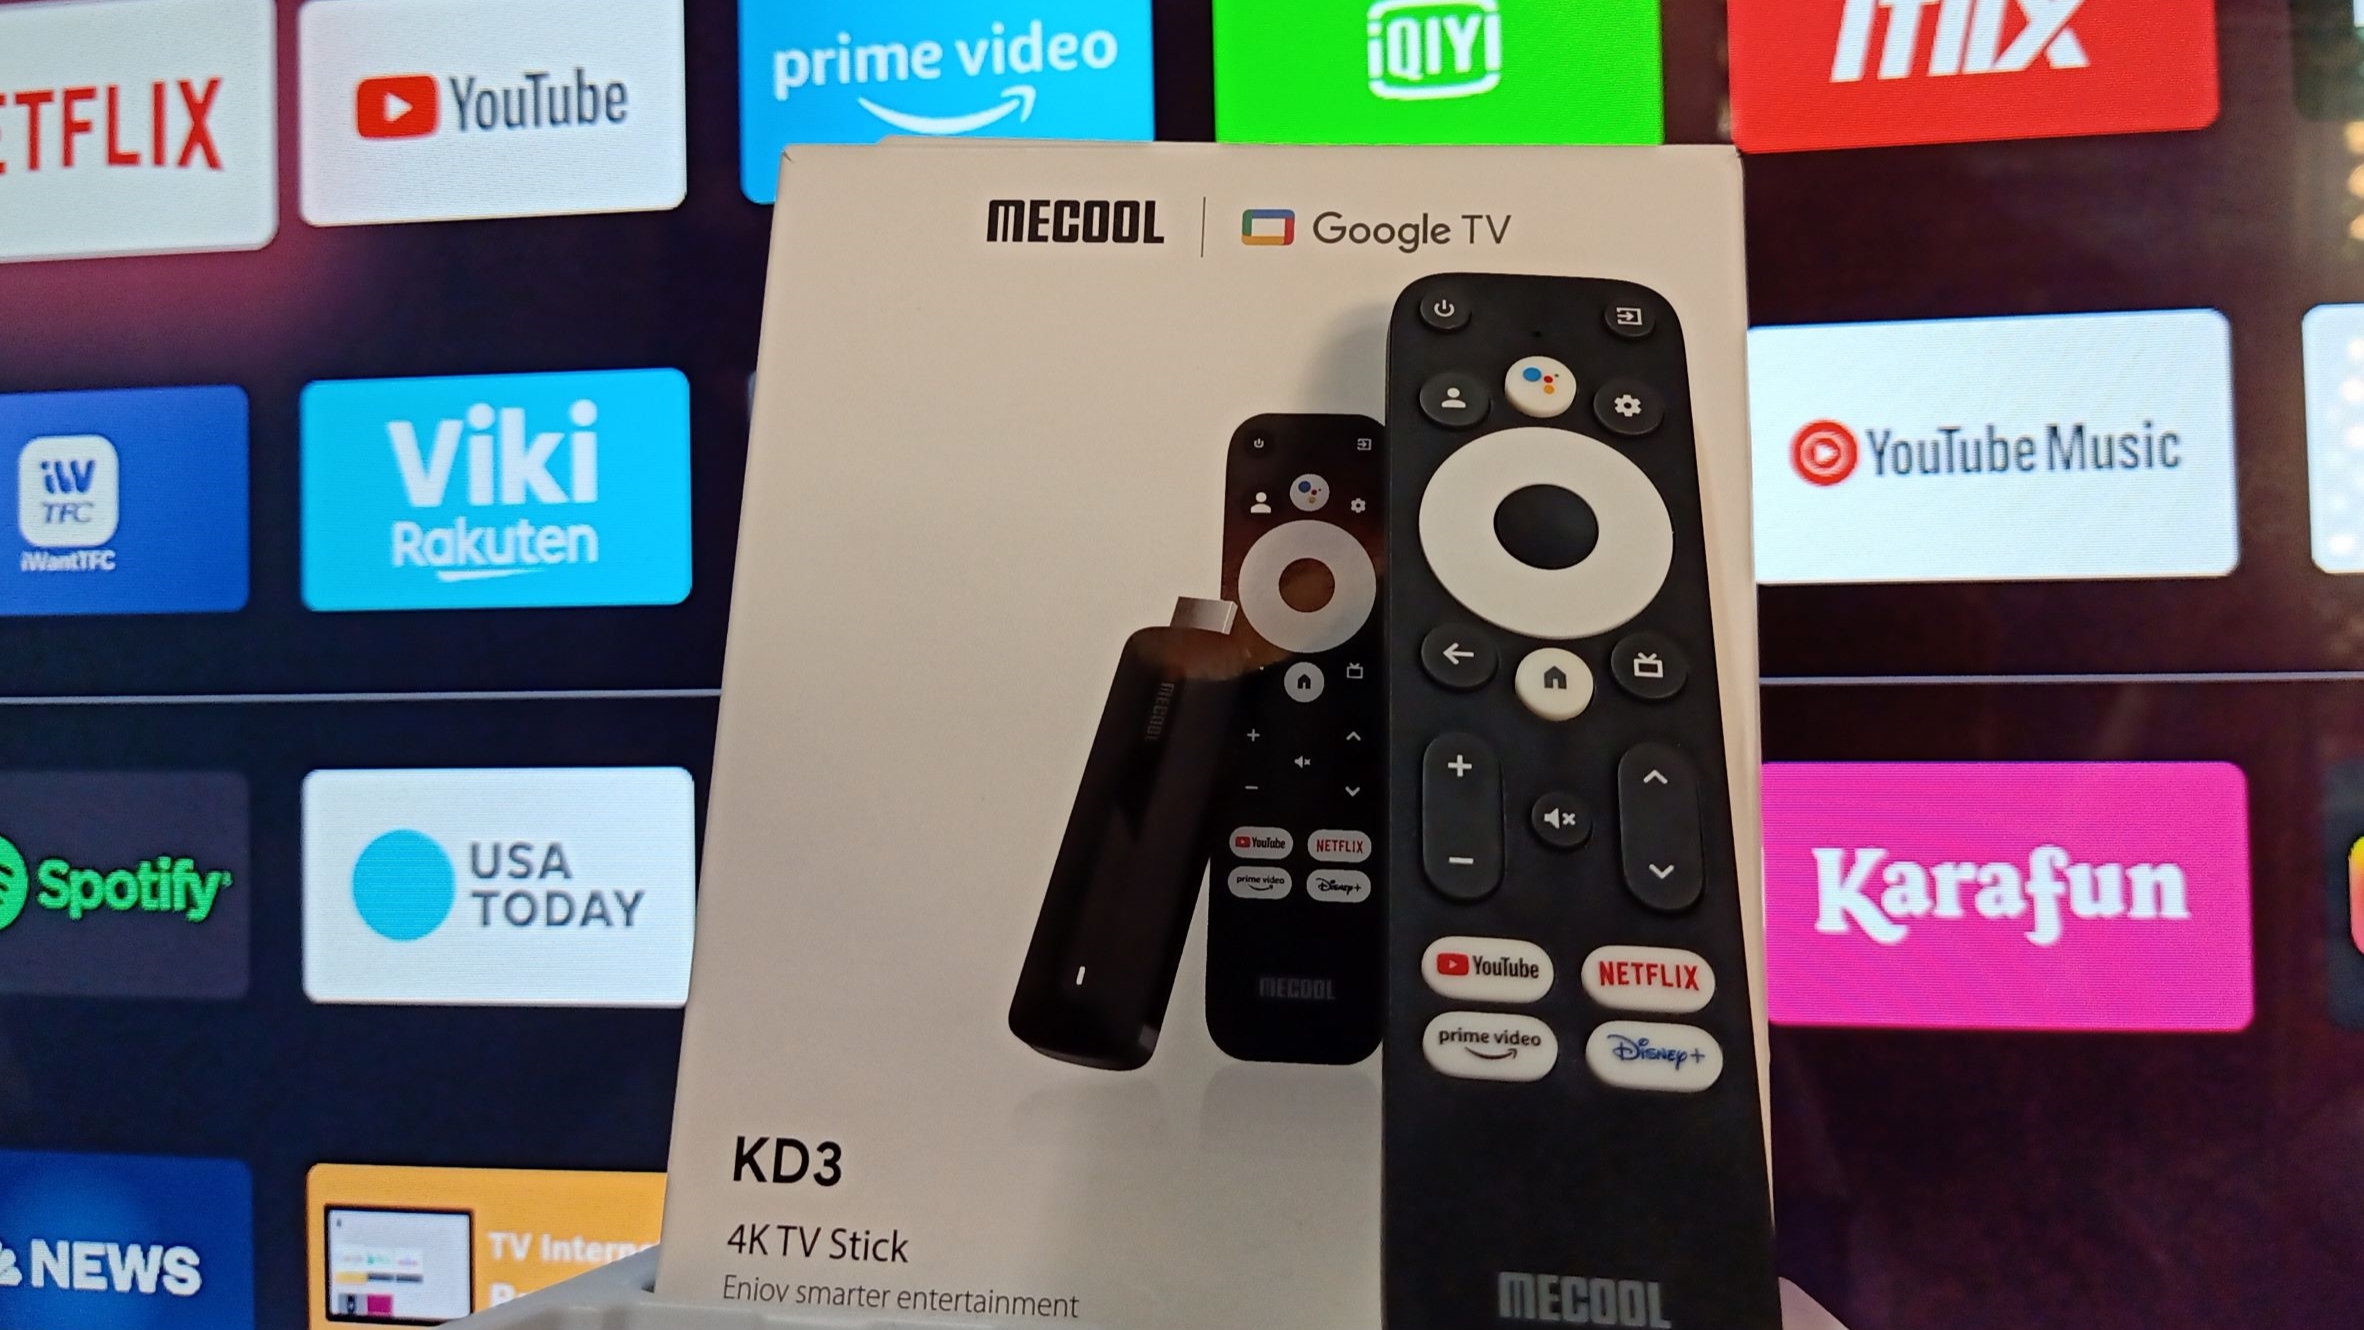 Mecool KD3 remote control and box